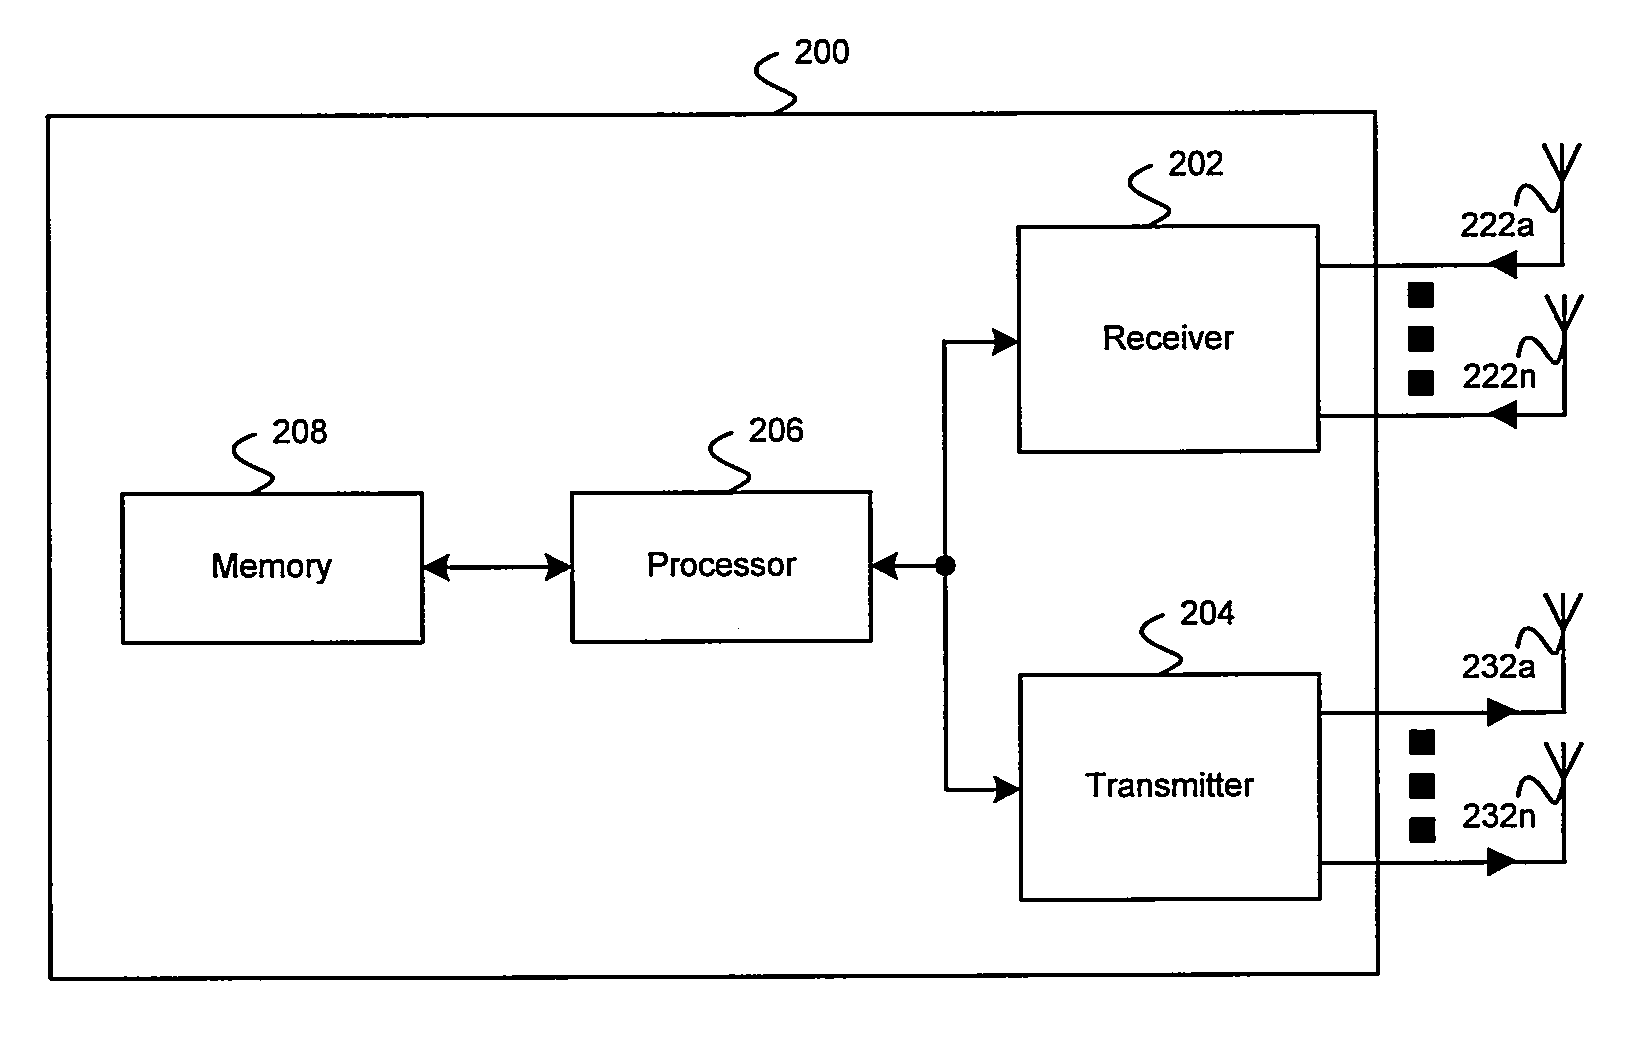 Method and system for sfbc/stbc in a communication diversity system using angle feedback